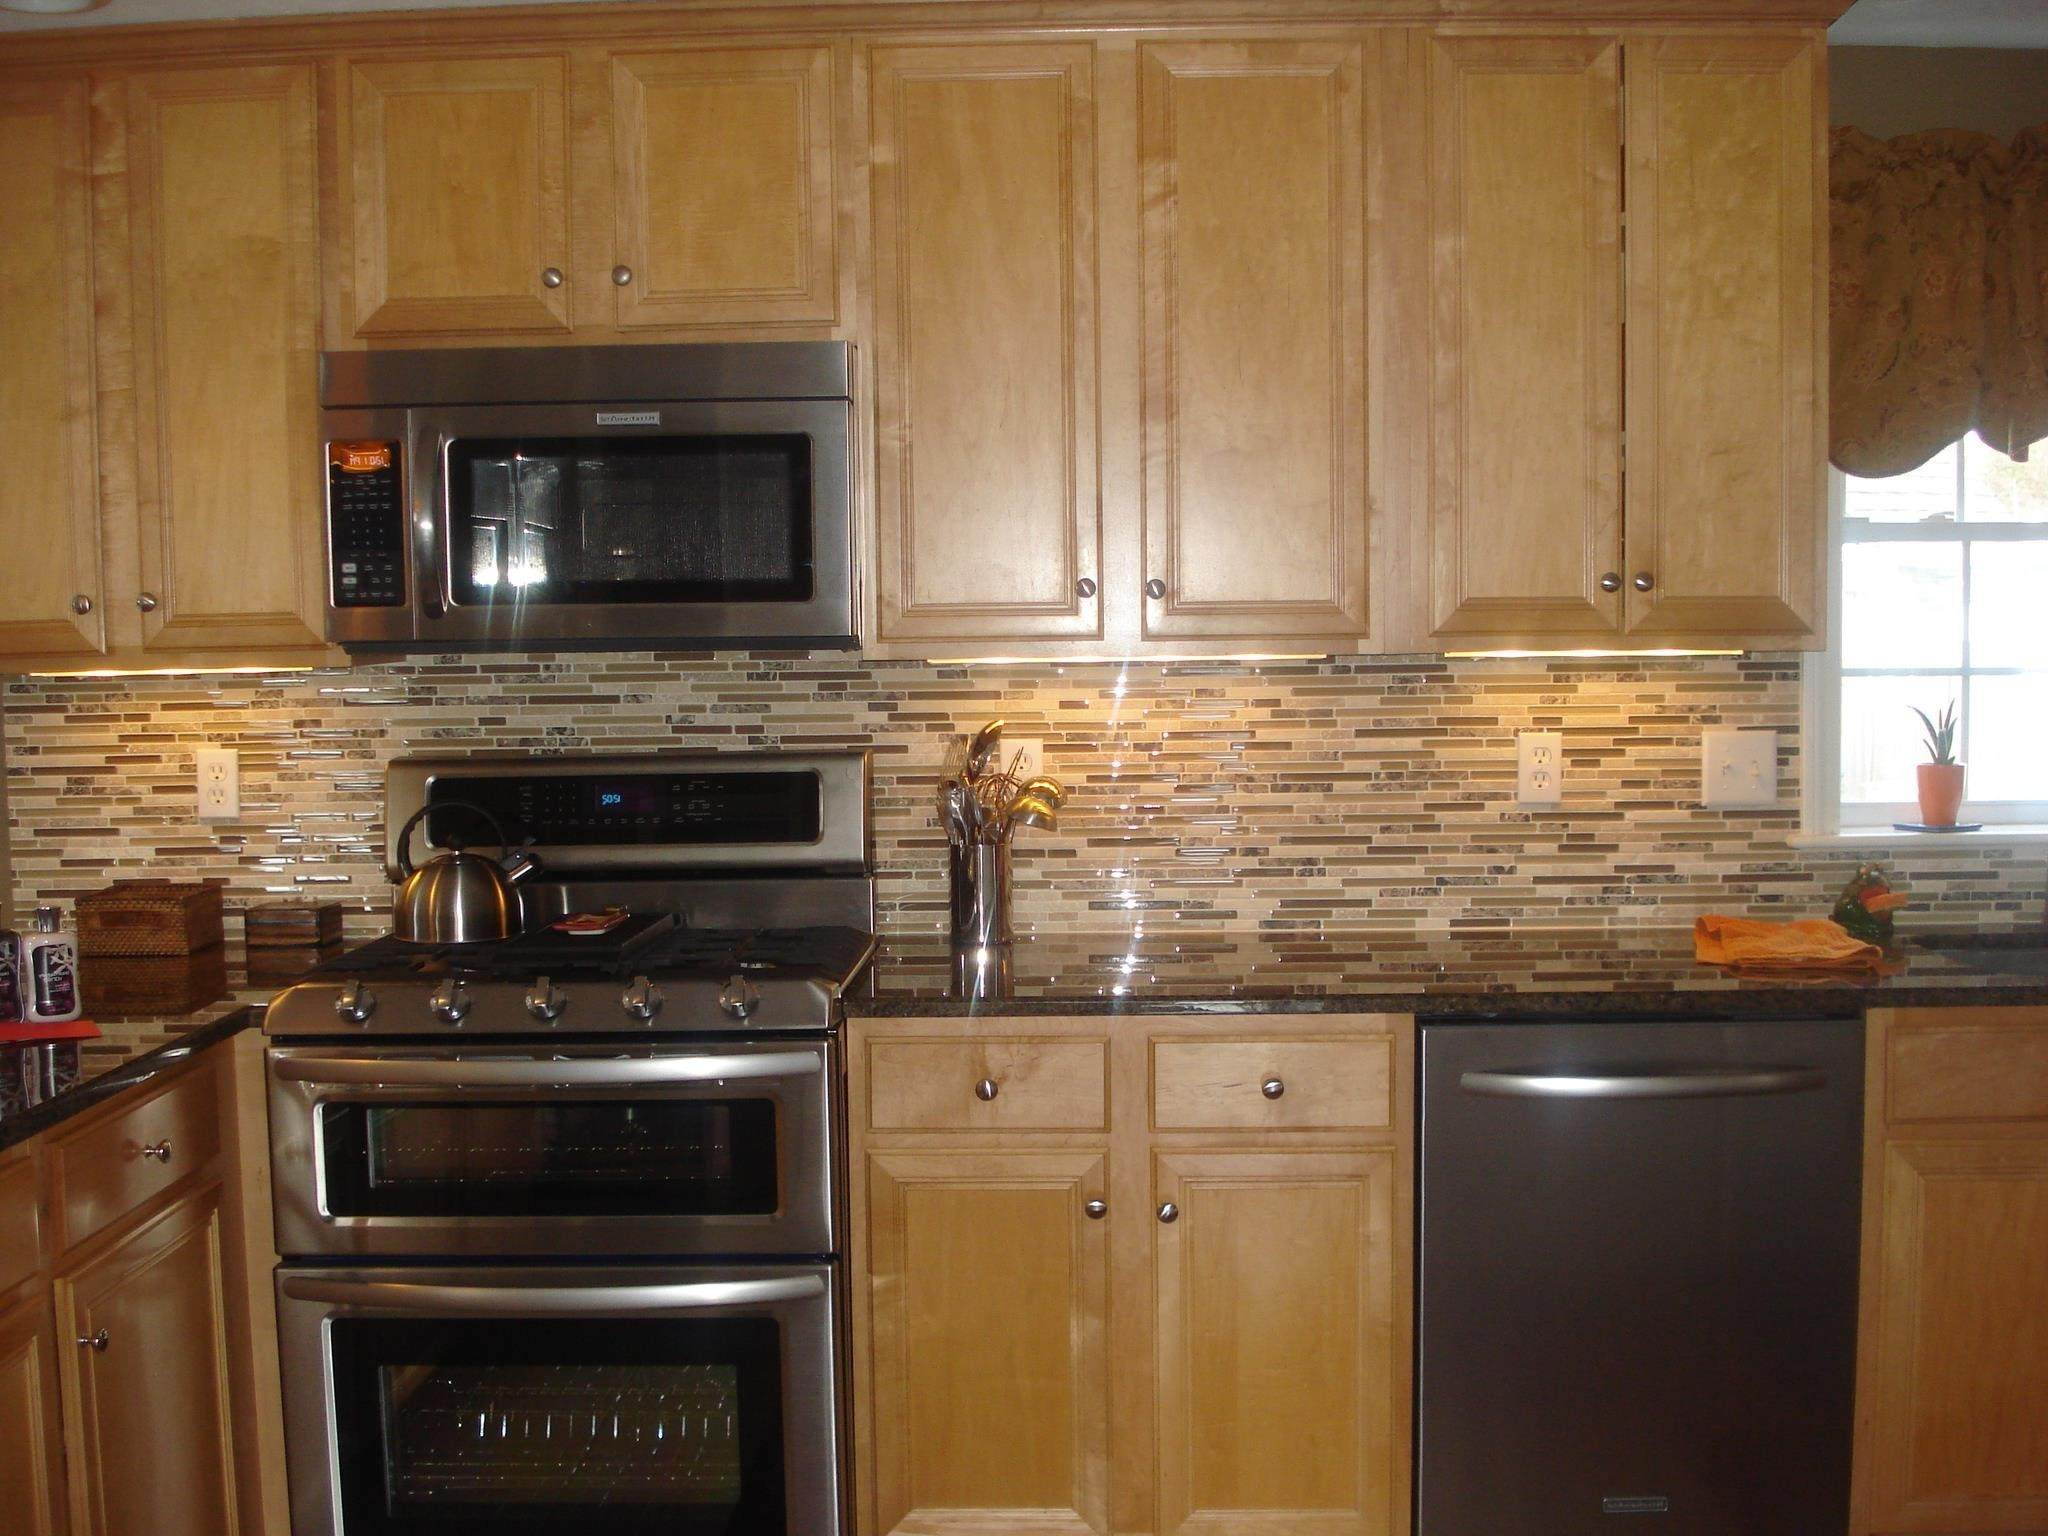 kitchen remodels with oak cabinets final kitchen makeover kitchen paint ideas oak cabinets